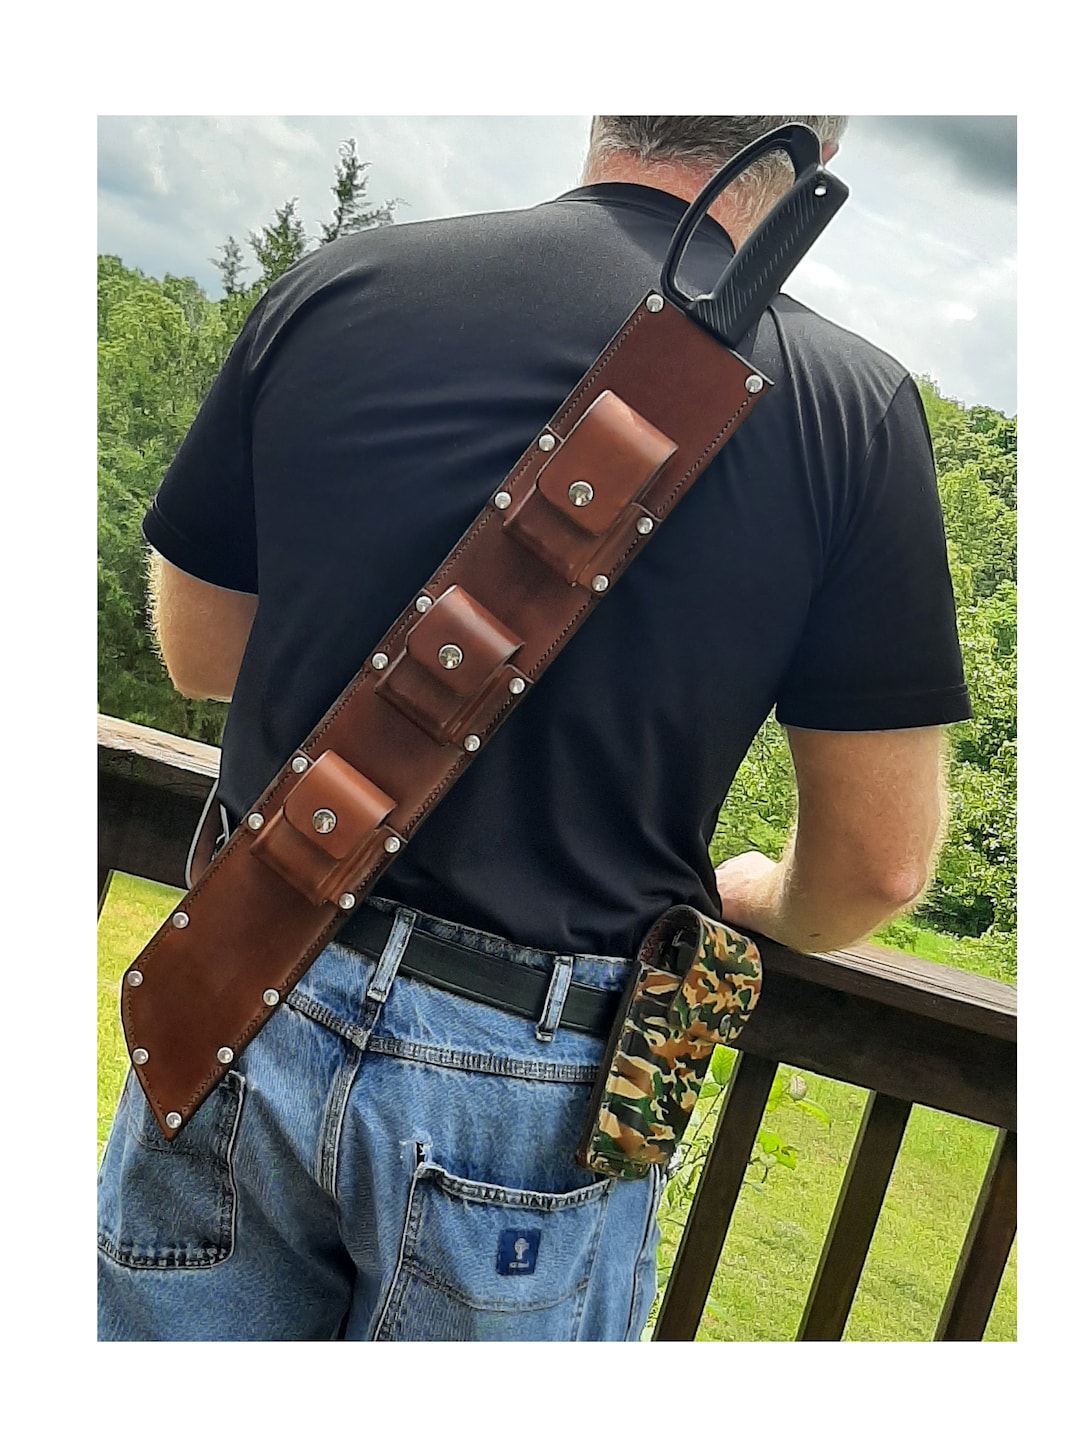 Machete Sheath Handmade With Shoulder Strap heavy THICK Leather Fits  Machetes up to an 24 Inch Blade 